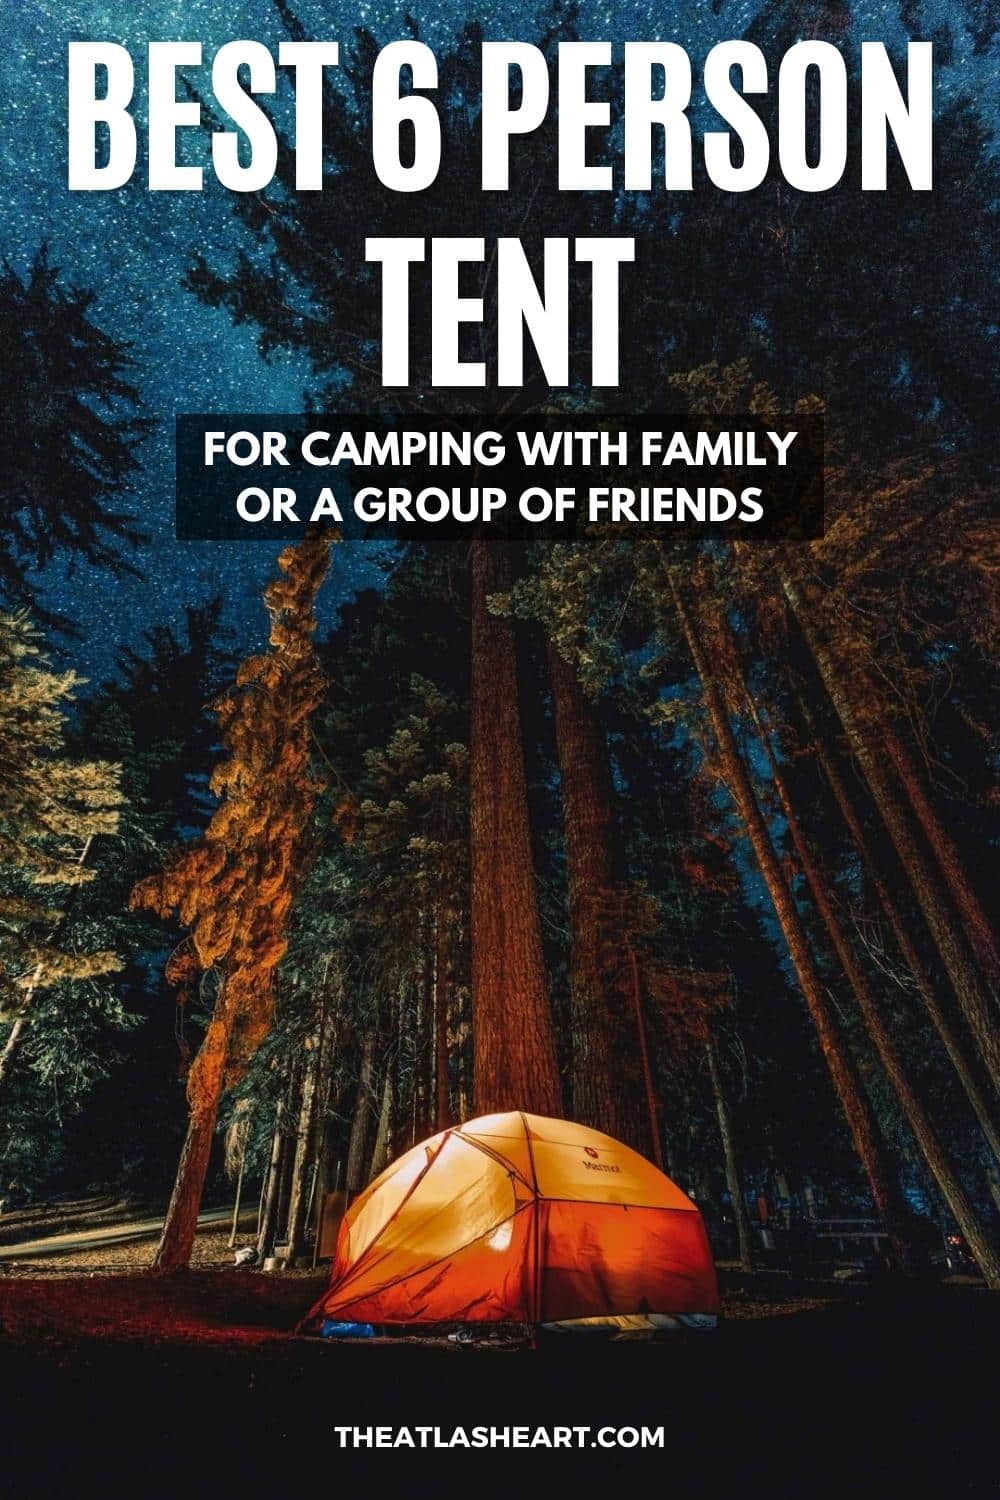 Best 6-Person Tent for Camping with Family or a Group of Friends